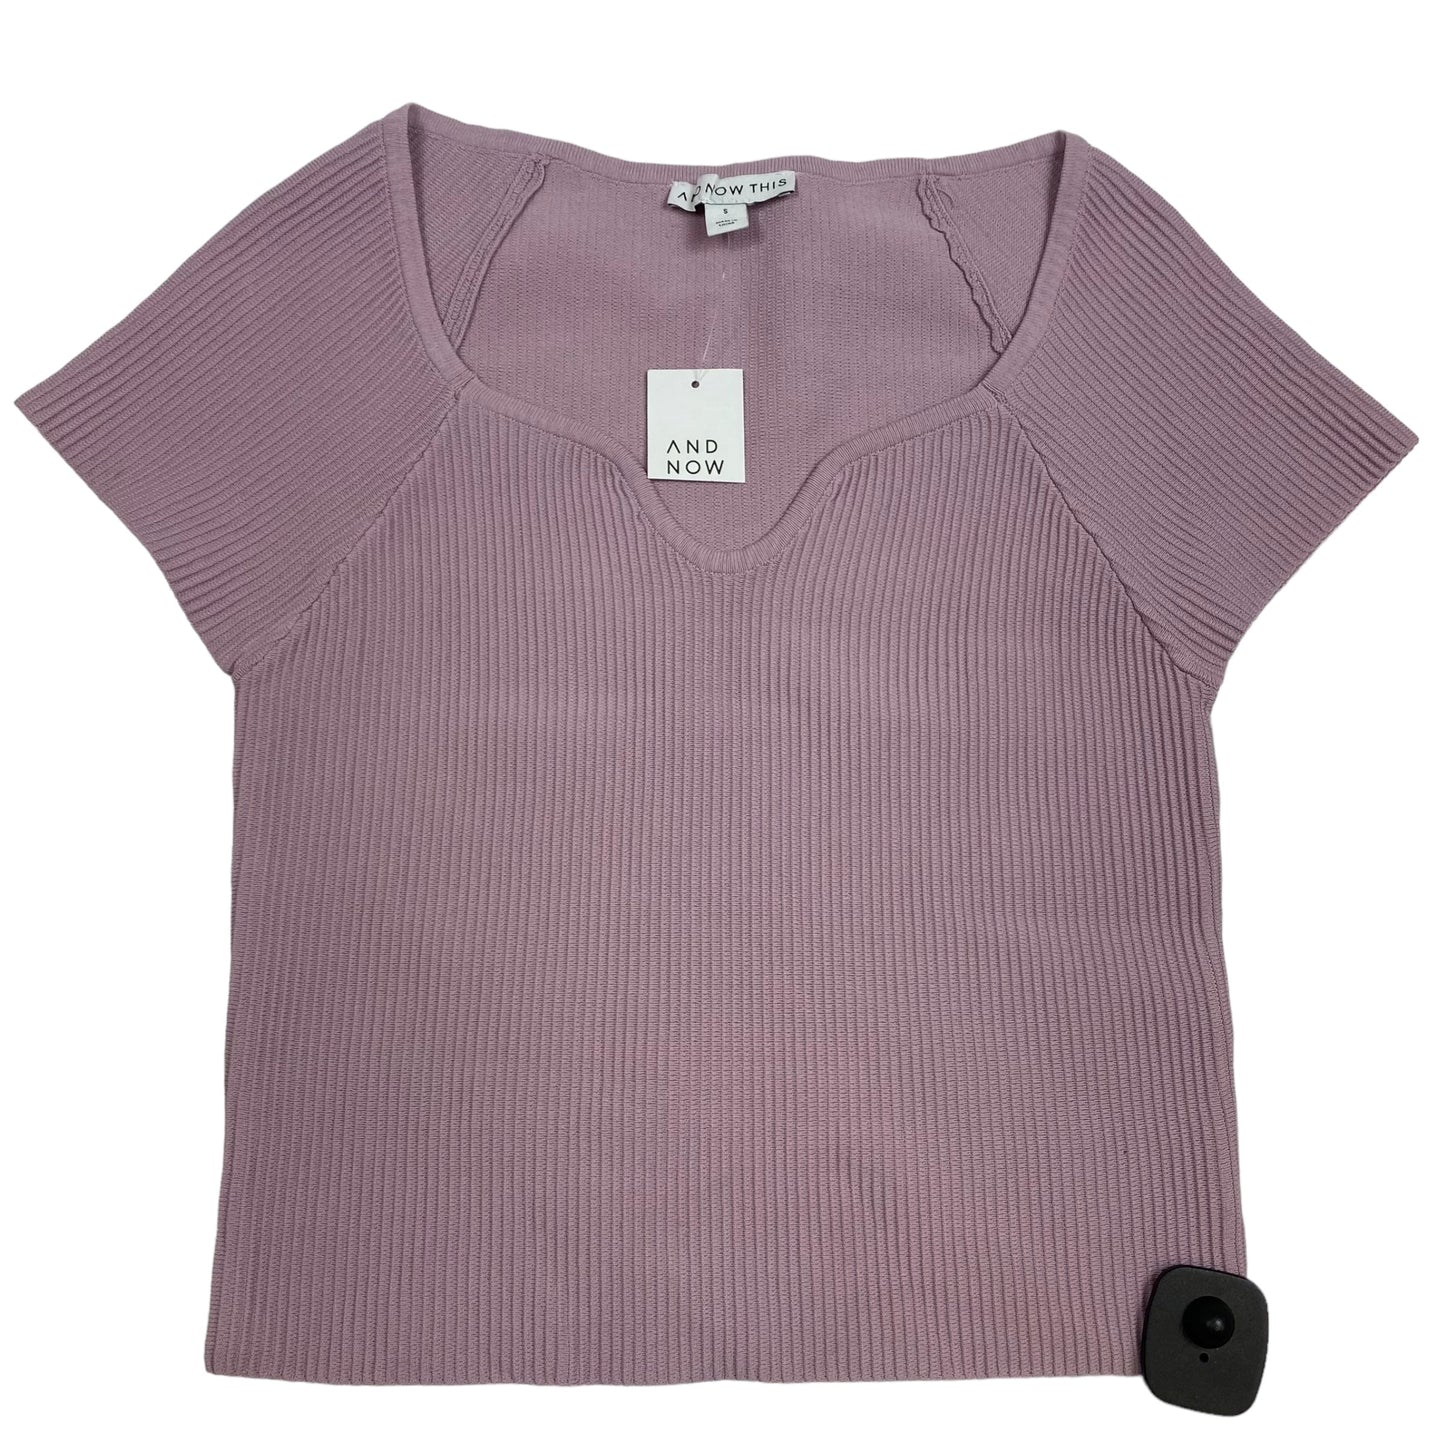 Purple Top Short Sleeve And Now This, Size S